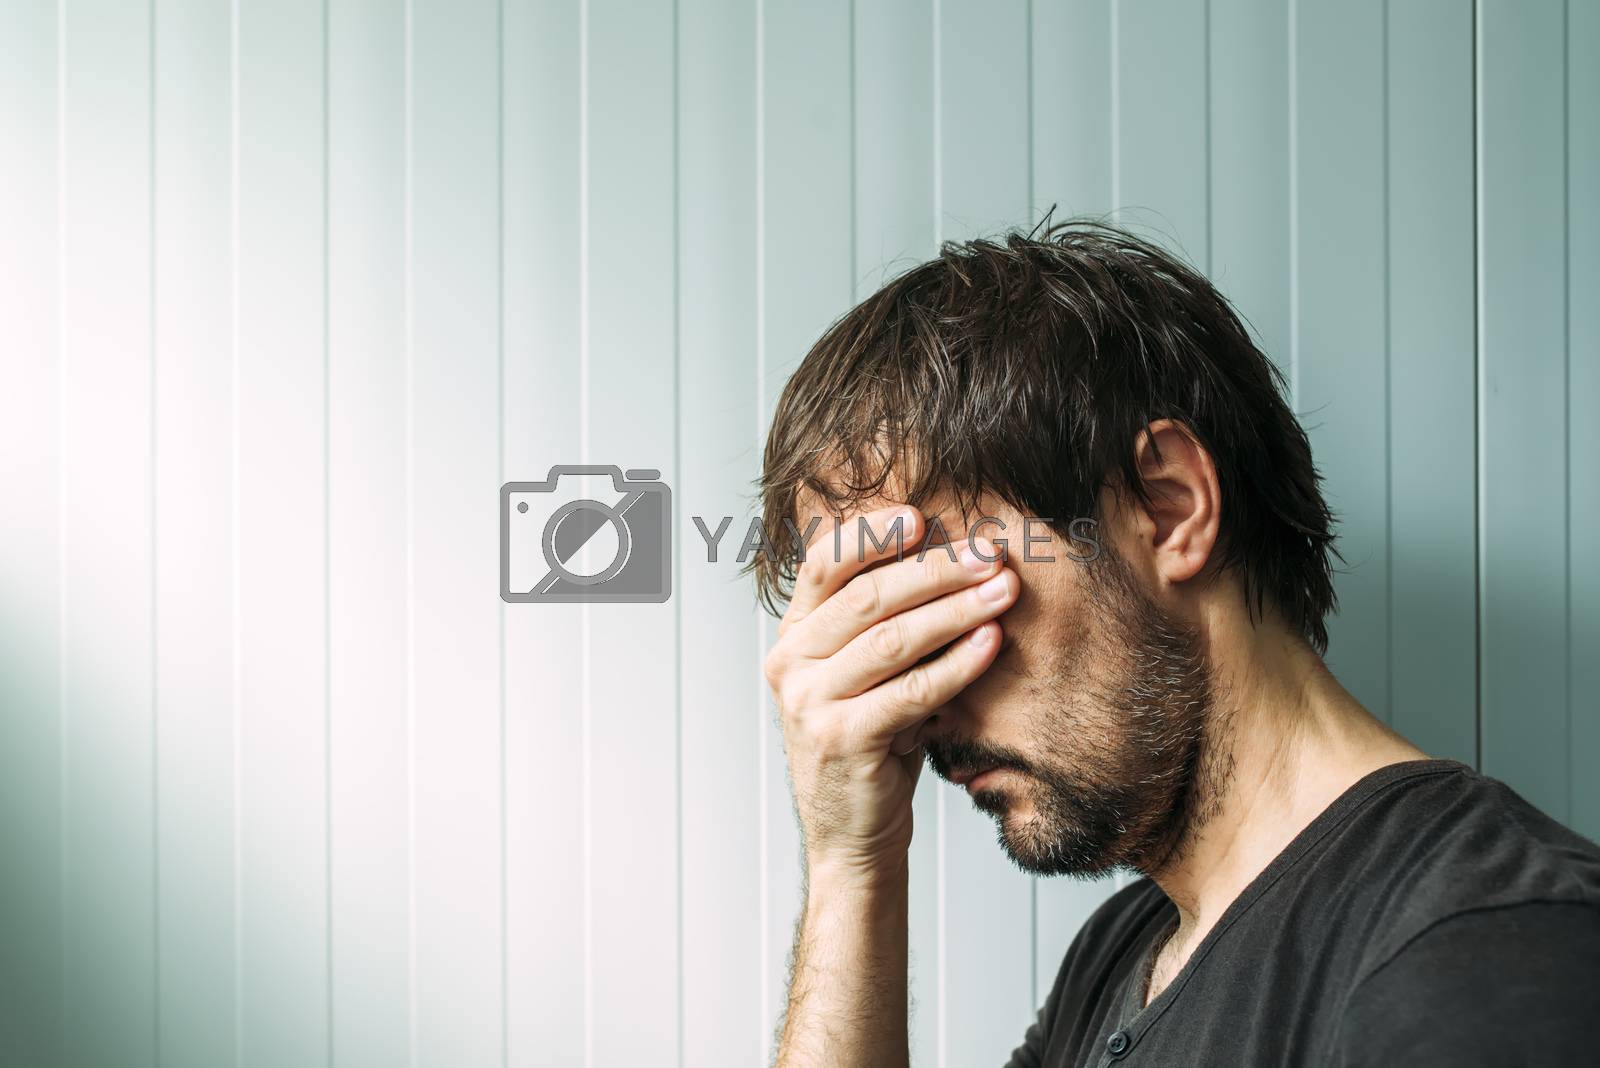 Royalty free image of Profile portrait od miserable troubled man by stevanovicigor